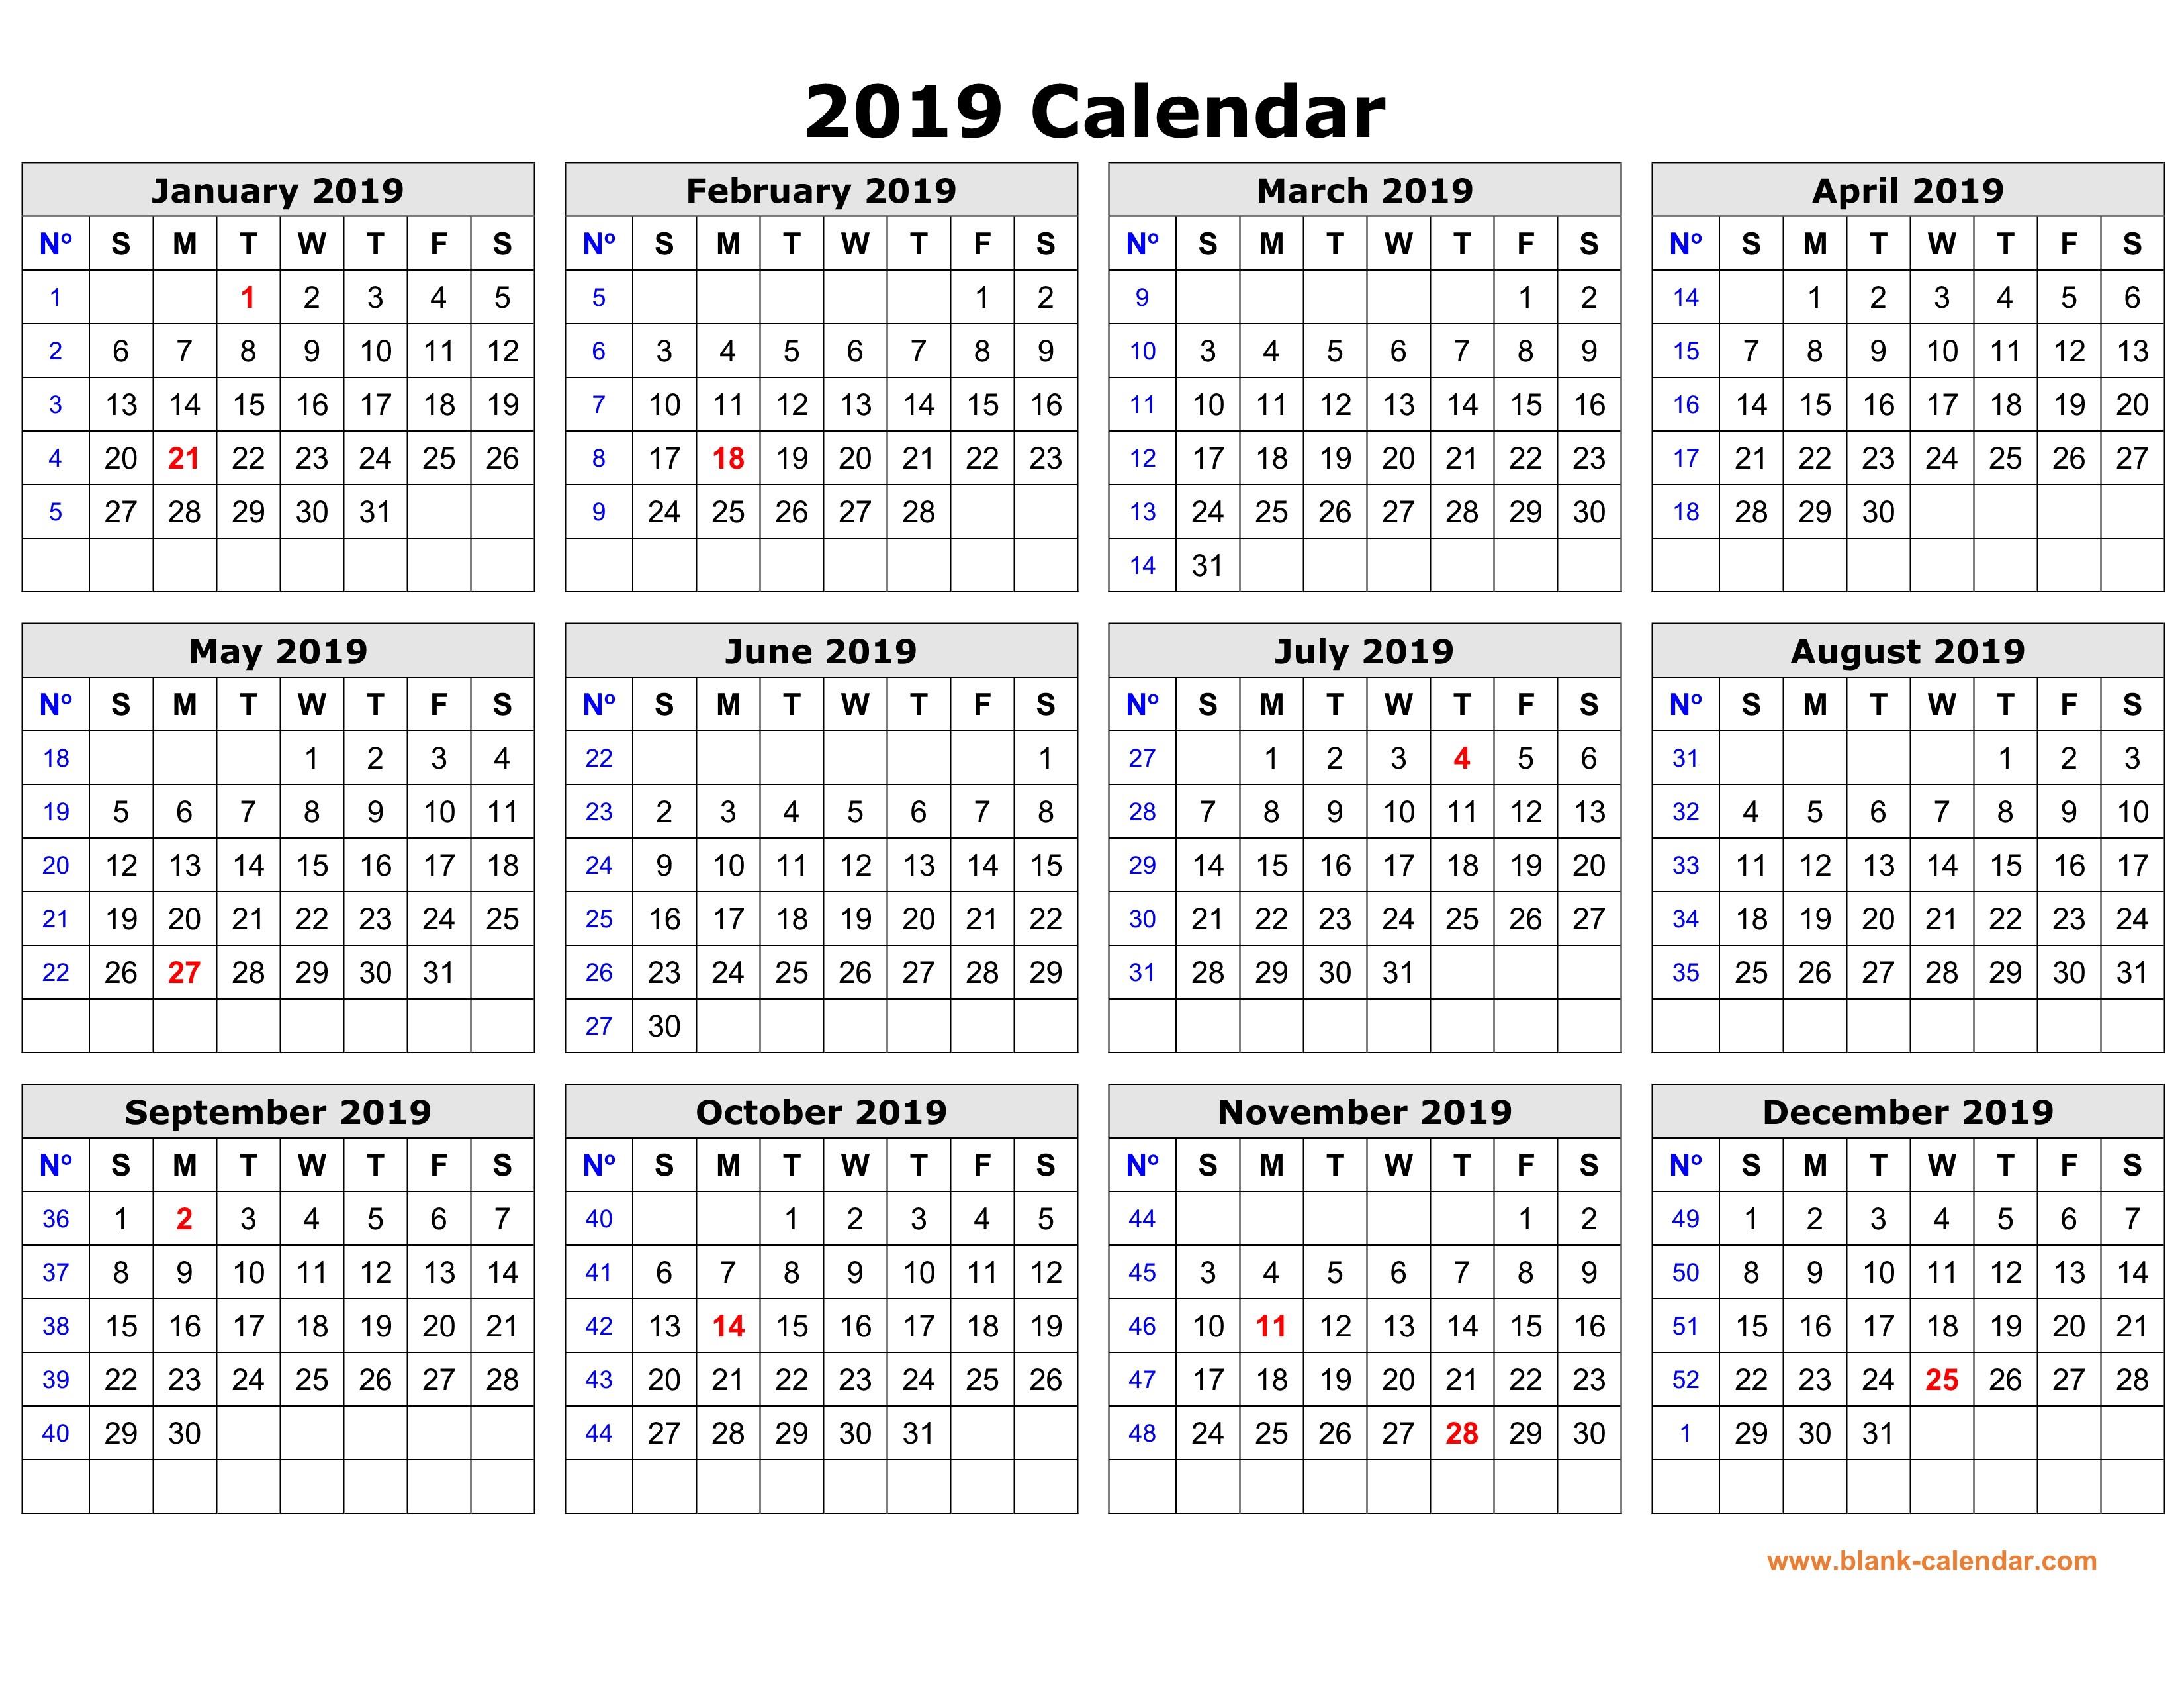 2019 Calendar One Page Printable Free Download Printable Calendar 2019 In One Page Clean